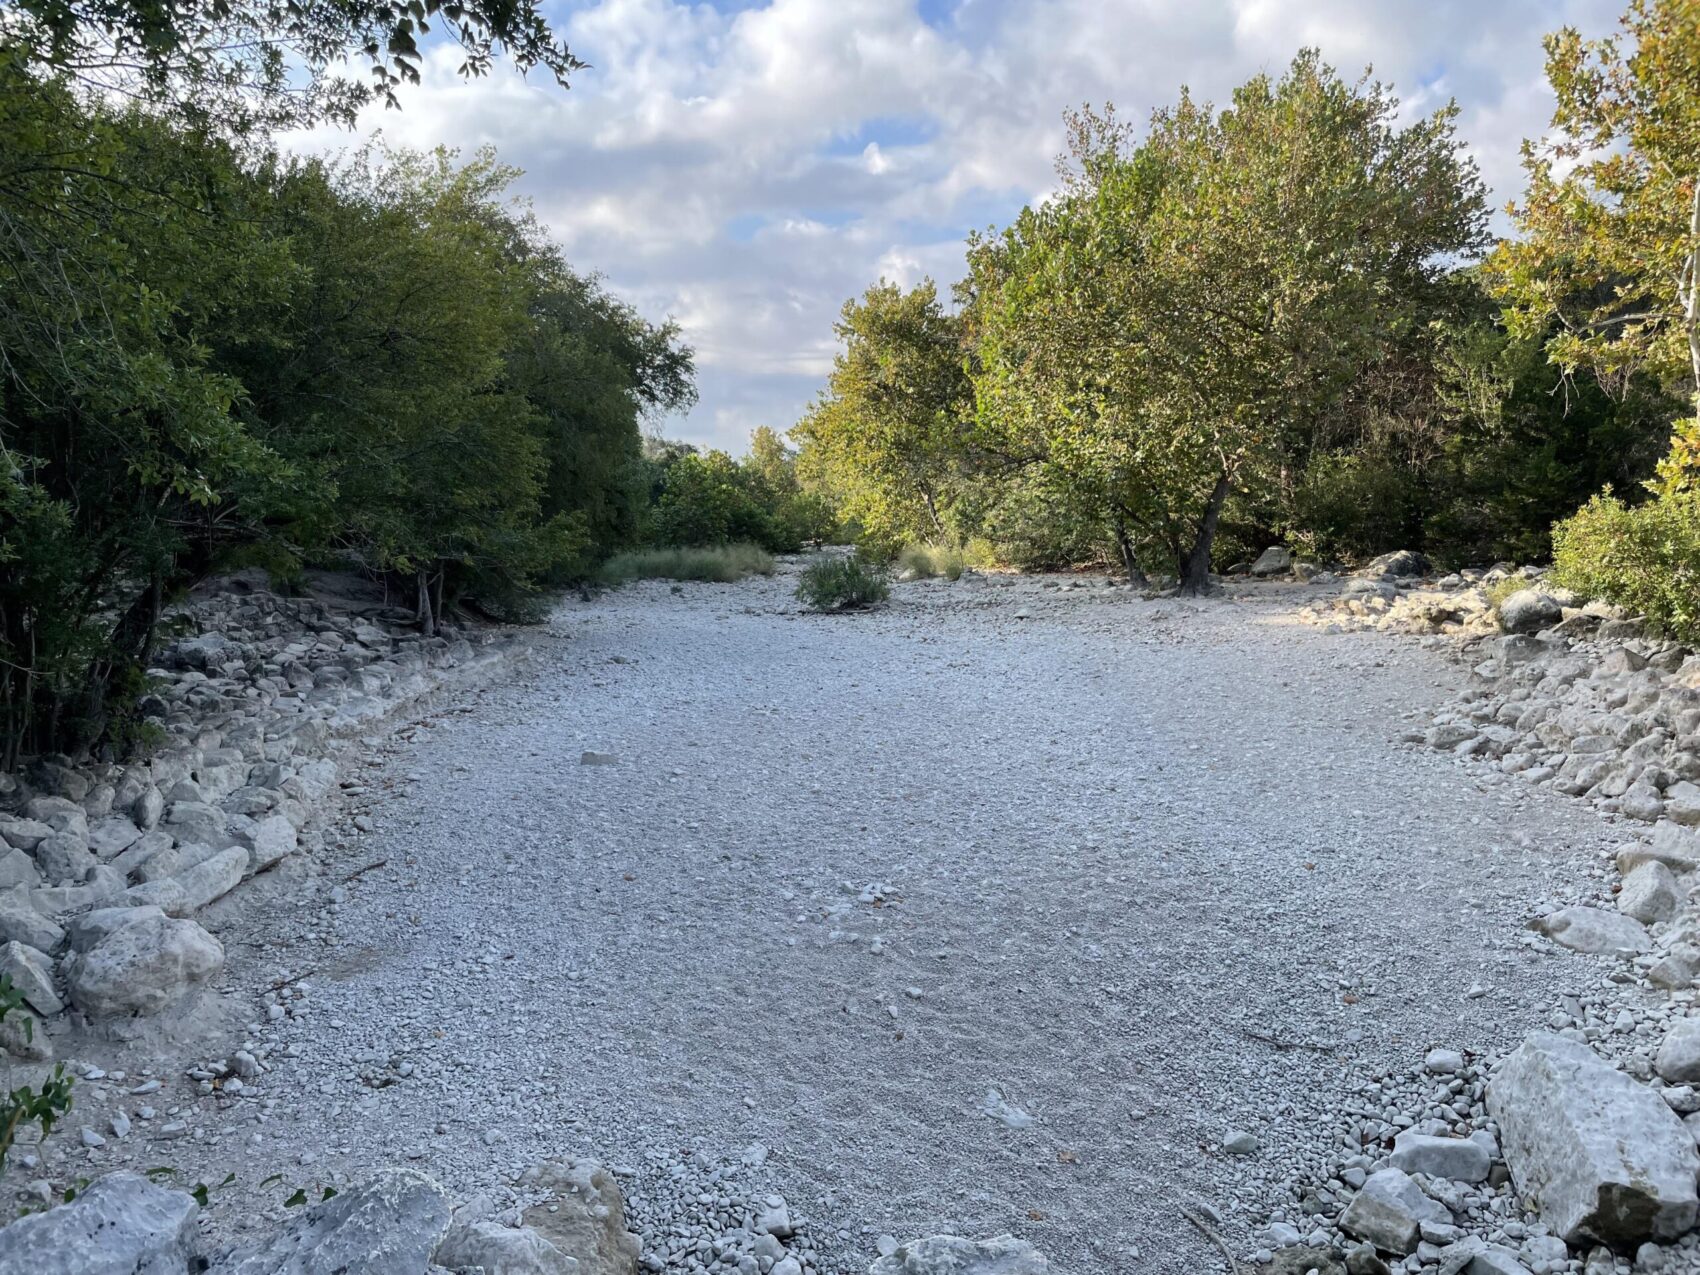 A view of the rocky, dry river bed of Barton Creek in Austin, Texas